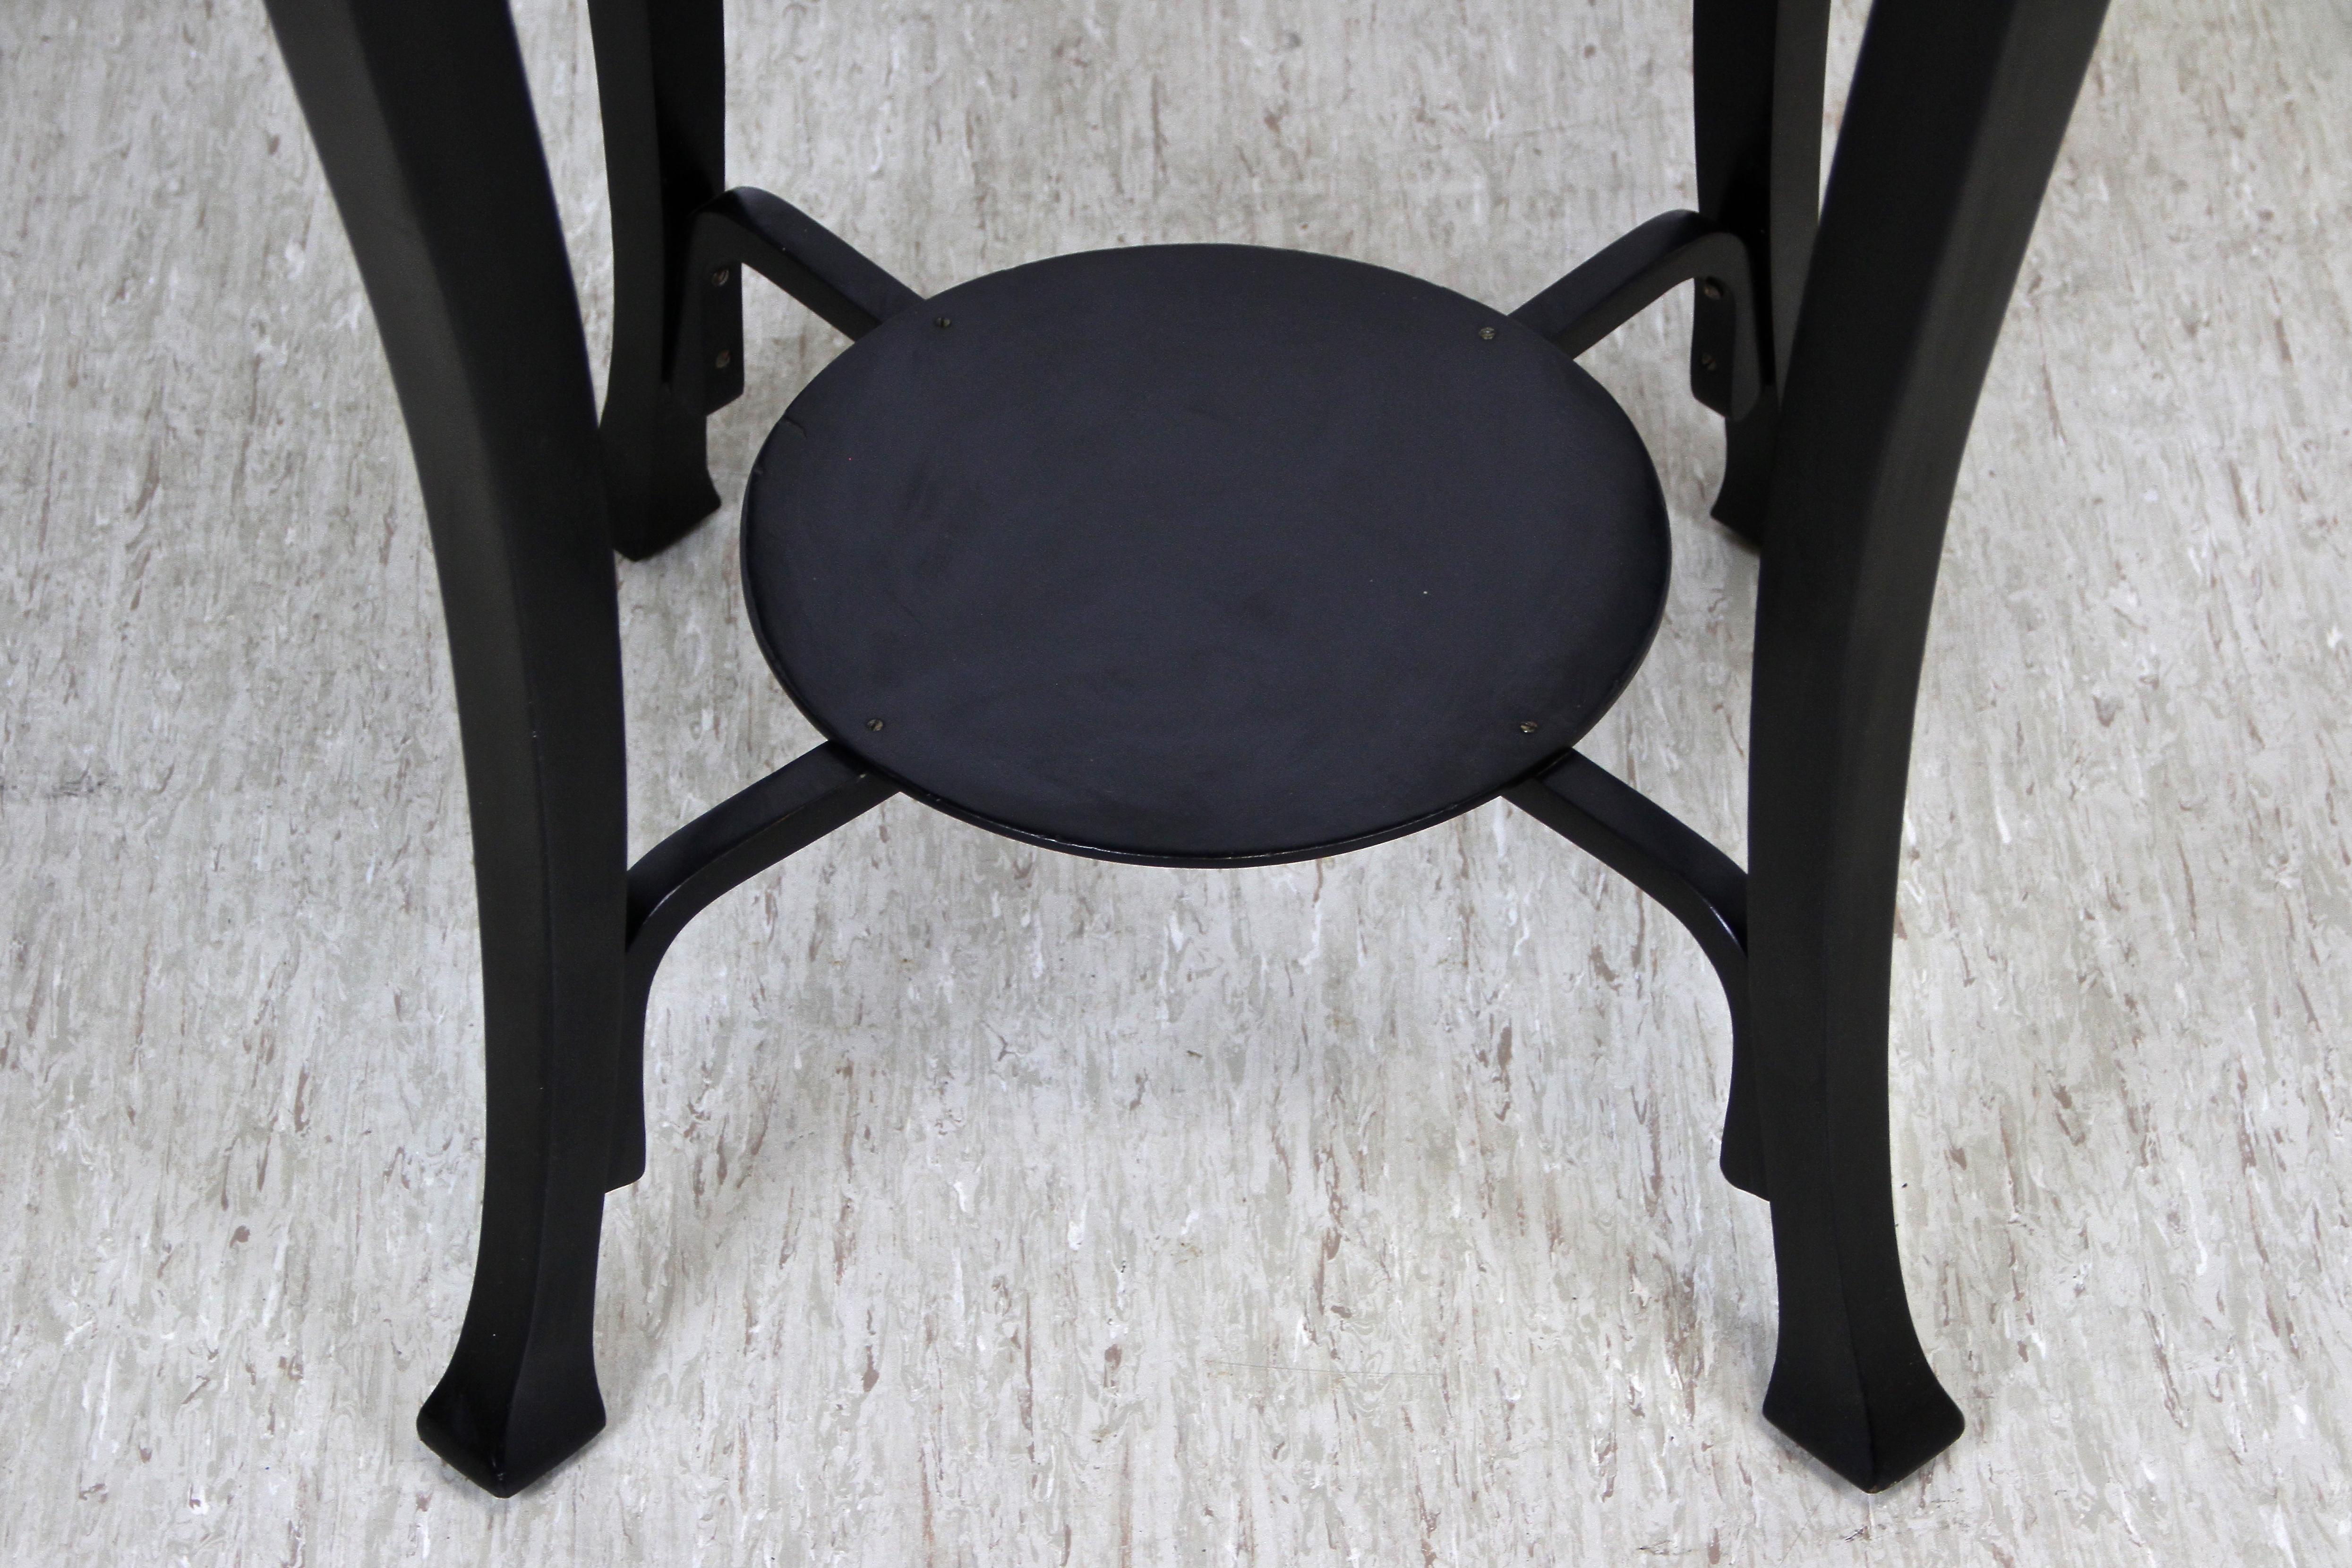 Impressive black Art Nouveau coffee or side table made by the world renown bentwood specialists Jacob & Josef Kohn in Vienna/ Austria, circa 1910. A stunning shape with round tabletop and beautifully curved legs, all artfully connected by an